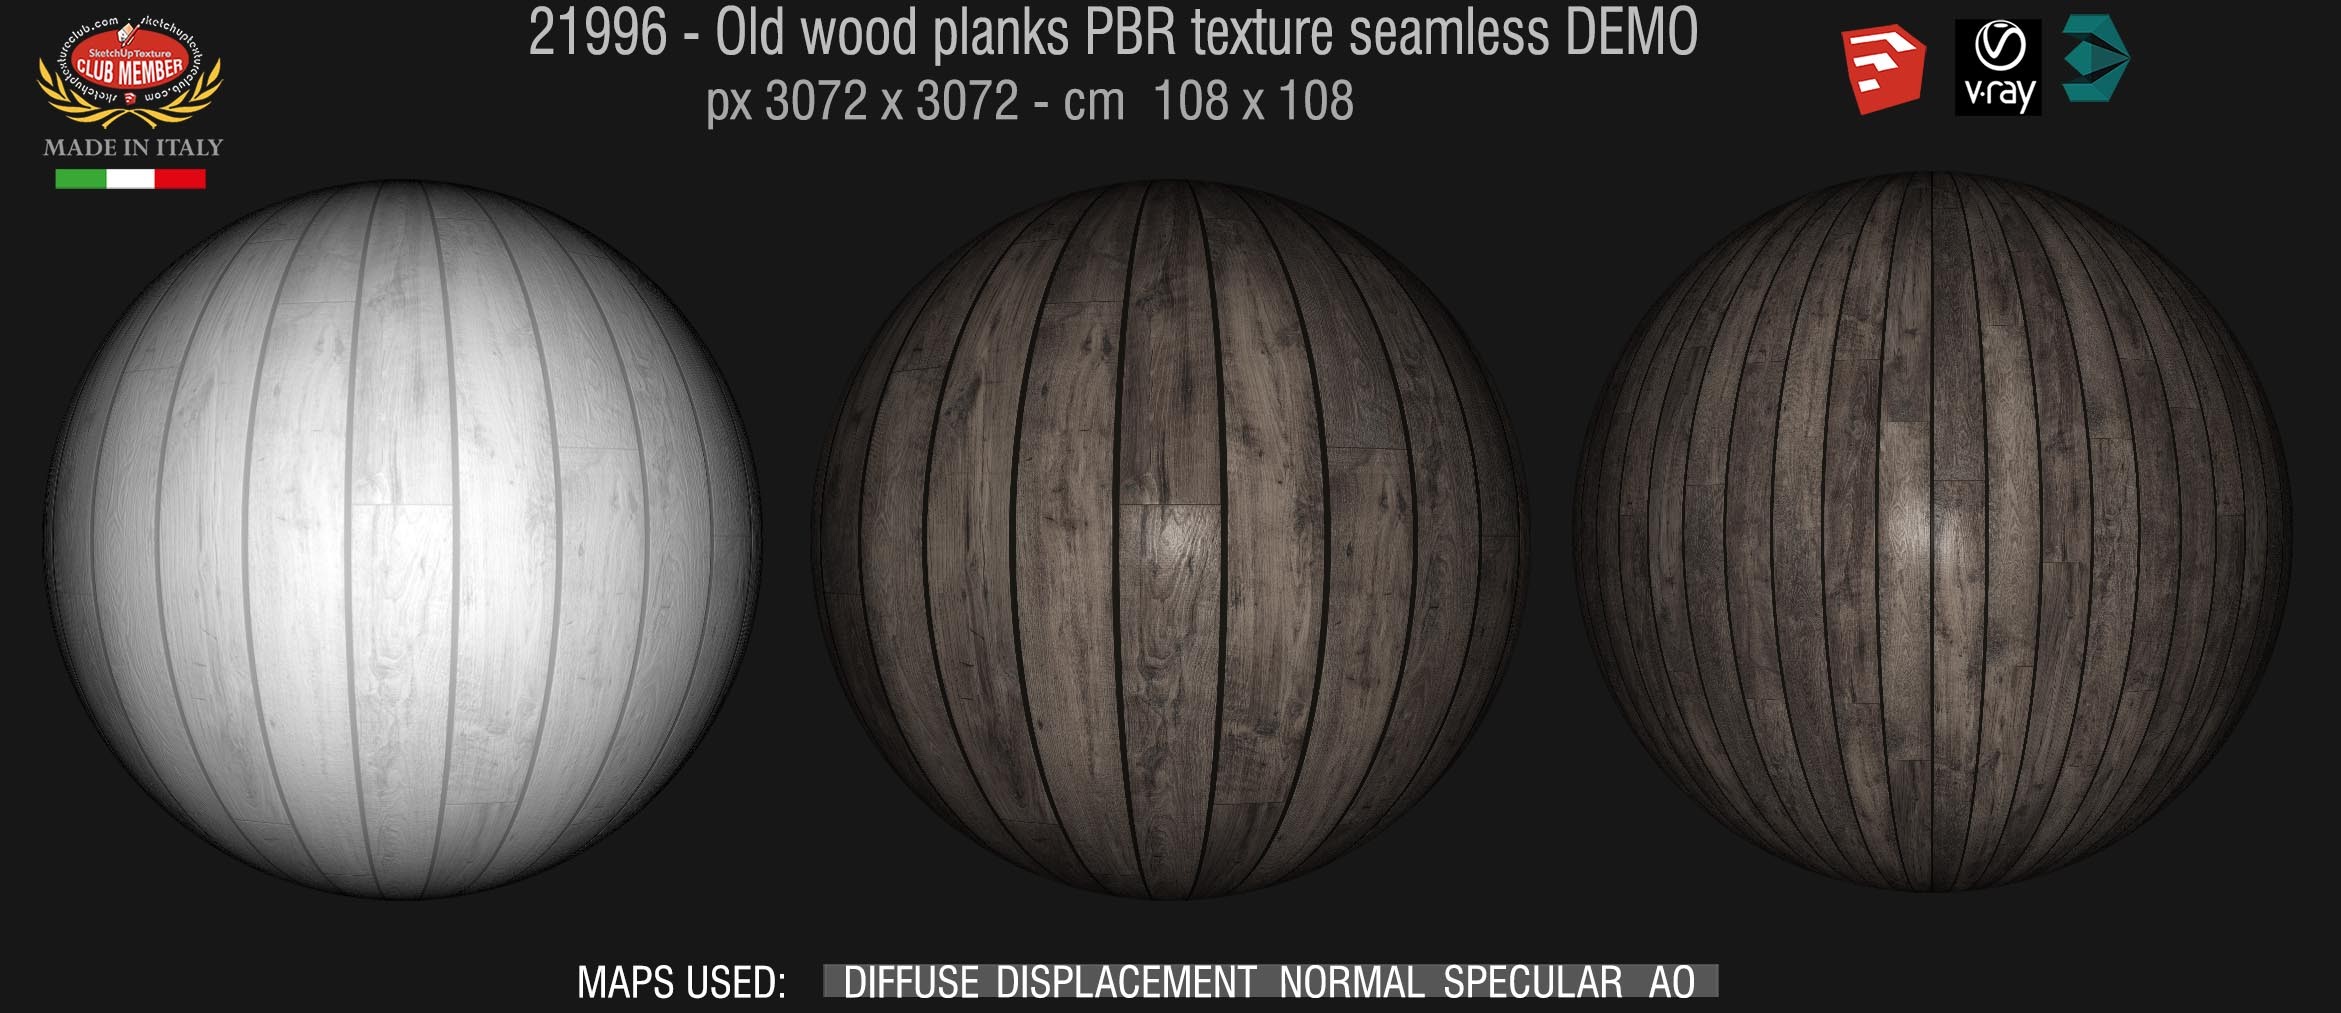 21996 Old wood planks PBR texture seamless DEMO